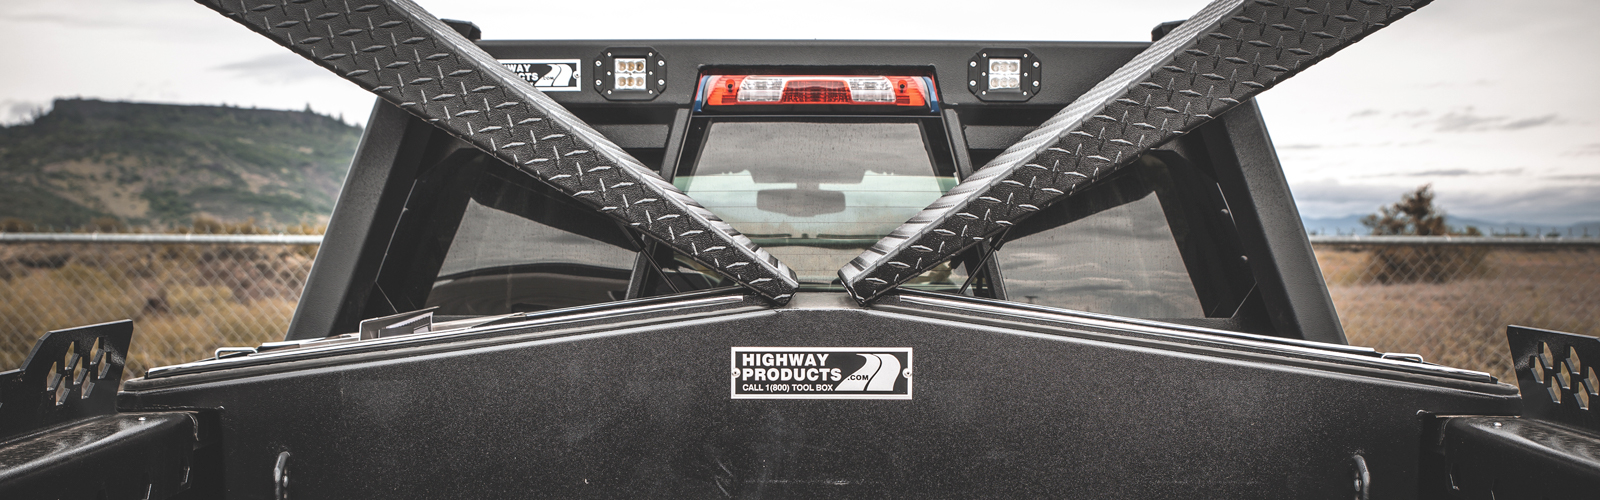 Truck accessory by Highway Products, Inc.